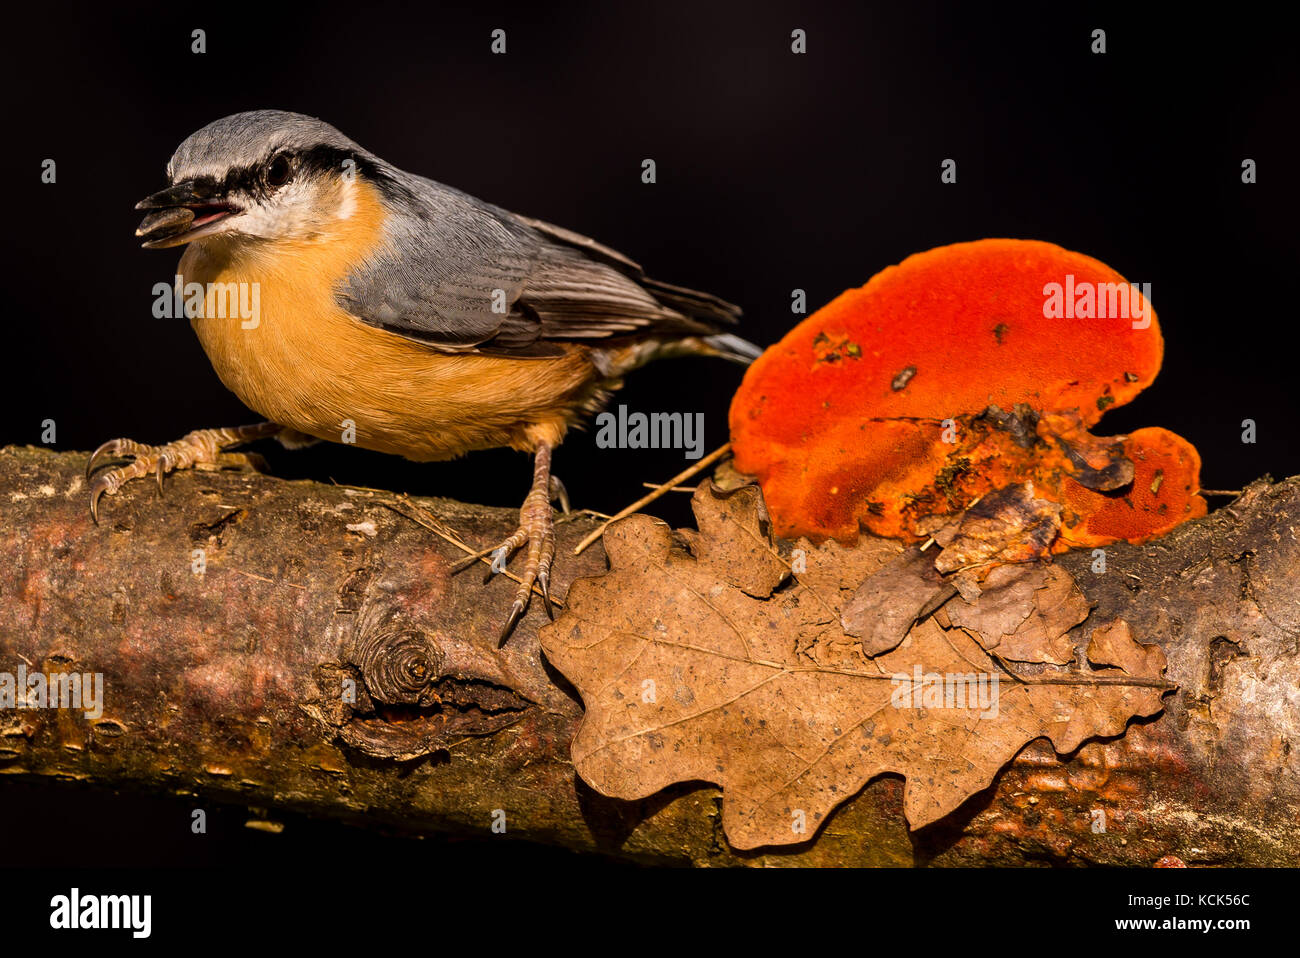 Horizontal photo of nice songbird Nuthatch with seed in a beak which is perched on the wooden twig with orange mushroom. Animal has grey, blue, black, Stock Photo